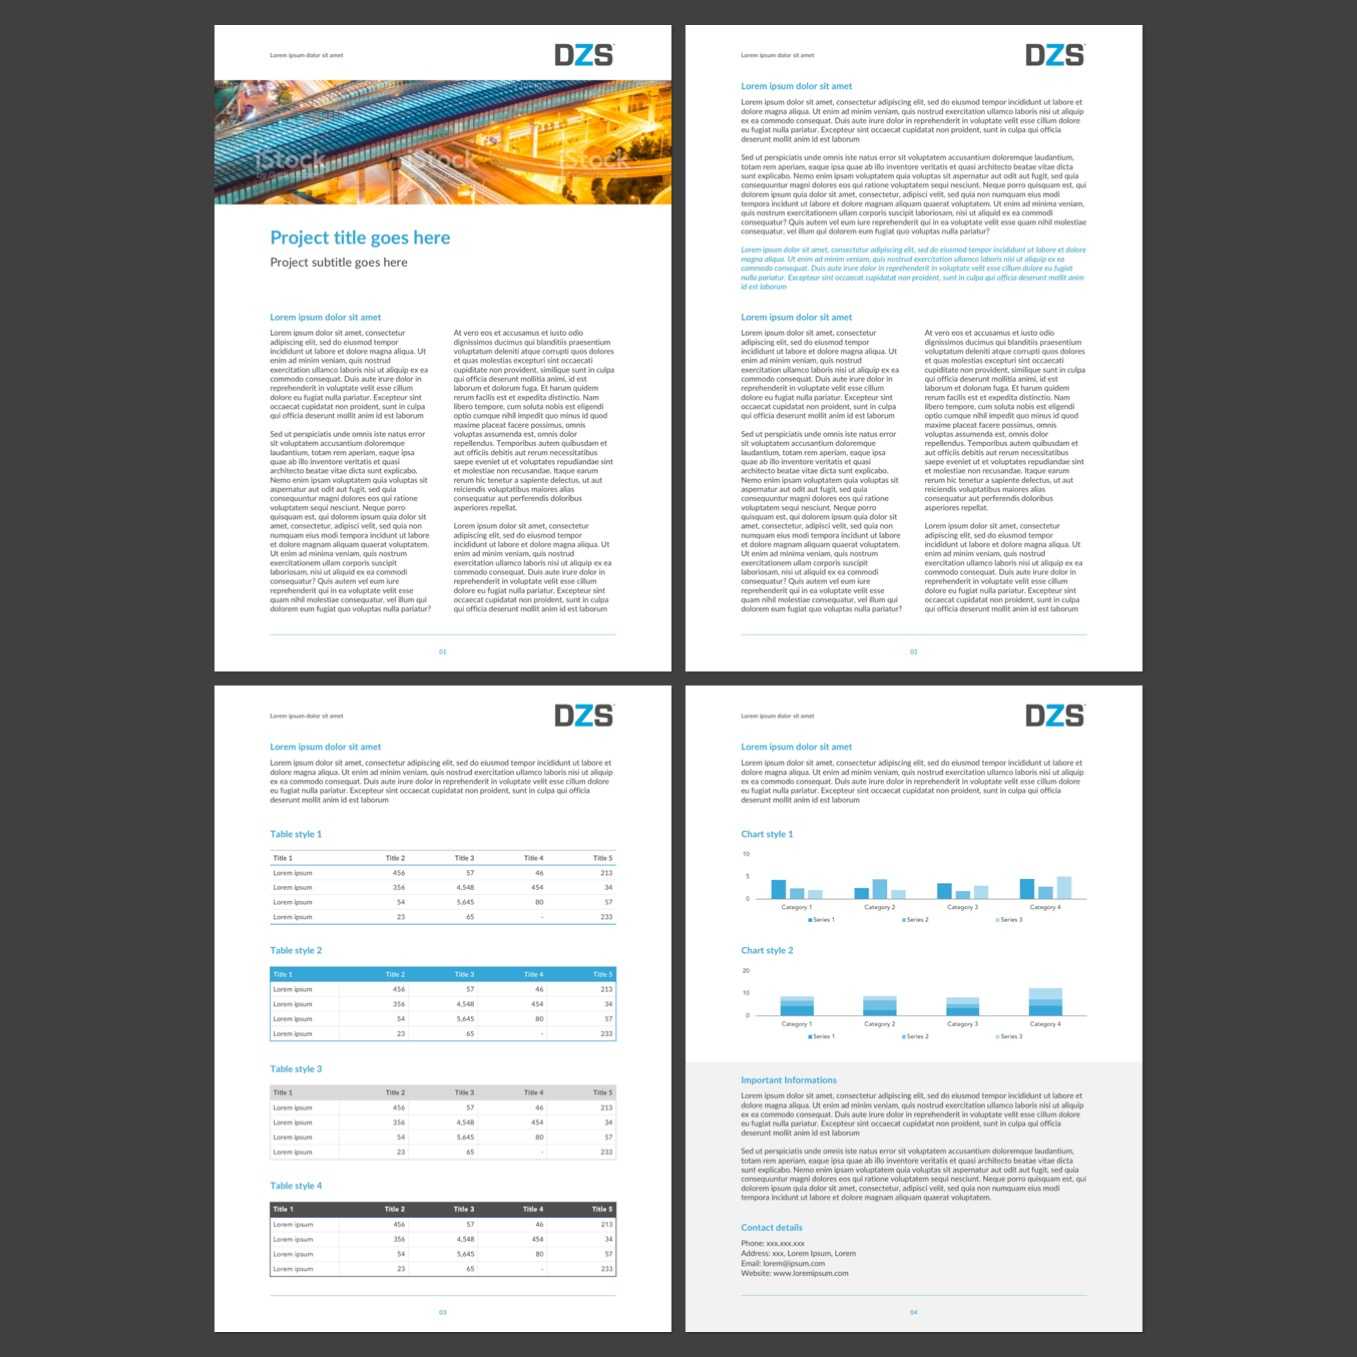 Telecom Equipment Datasheet, Case Study, And White Paper Intended For Datasheet Template Word